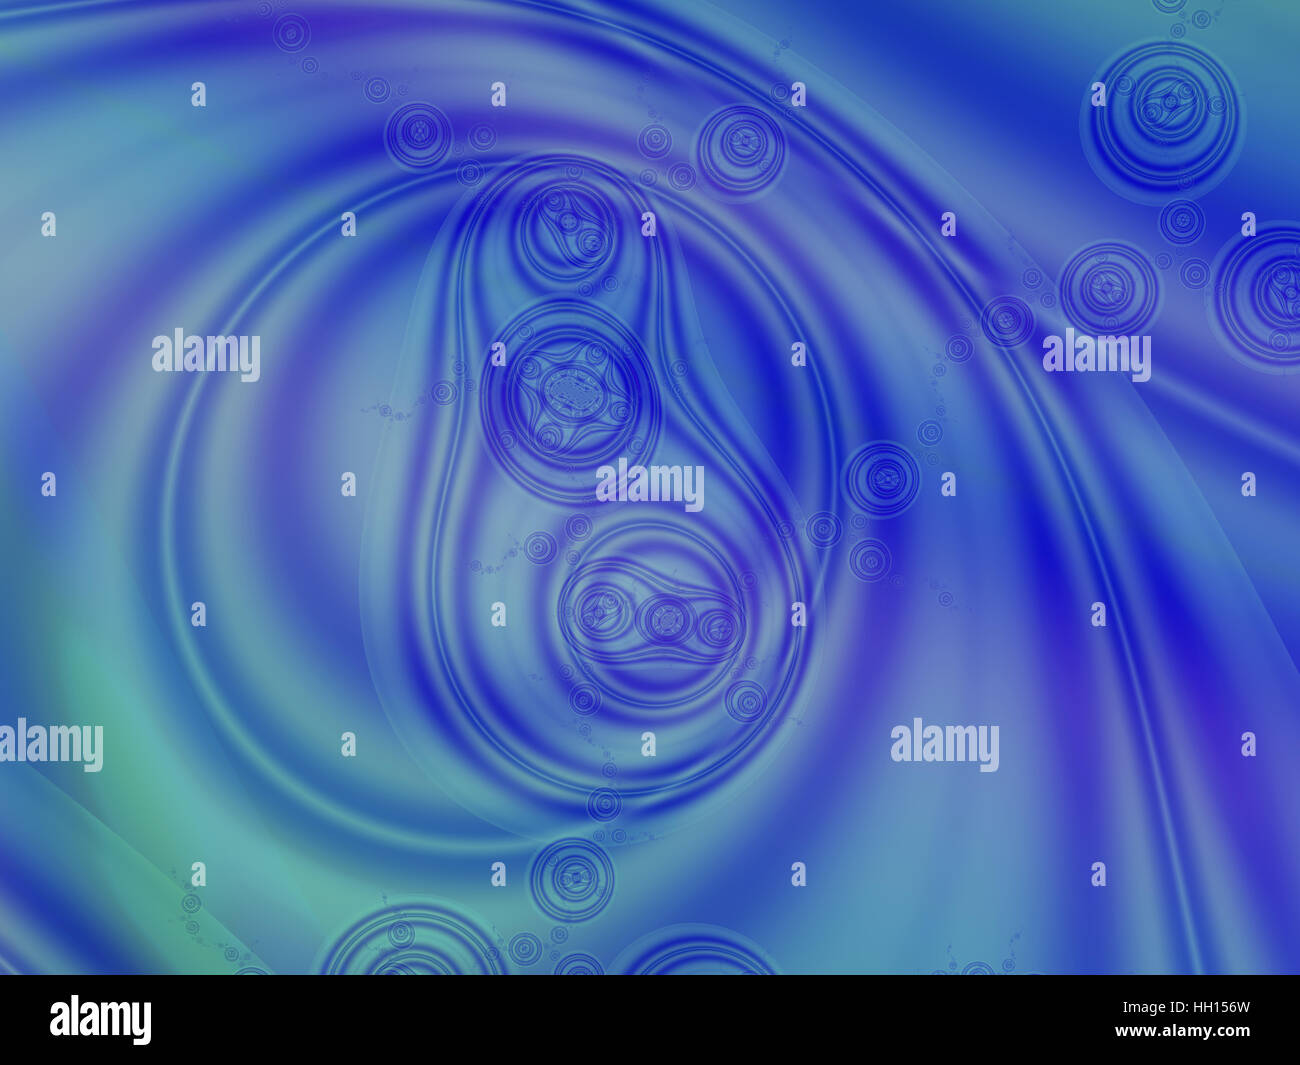 Beautiful blue fractal abstract image with swirls and circles resembling cells splitting, dividing and floating in liquid Stock Photo